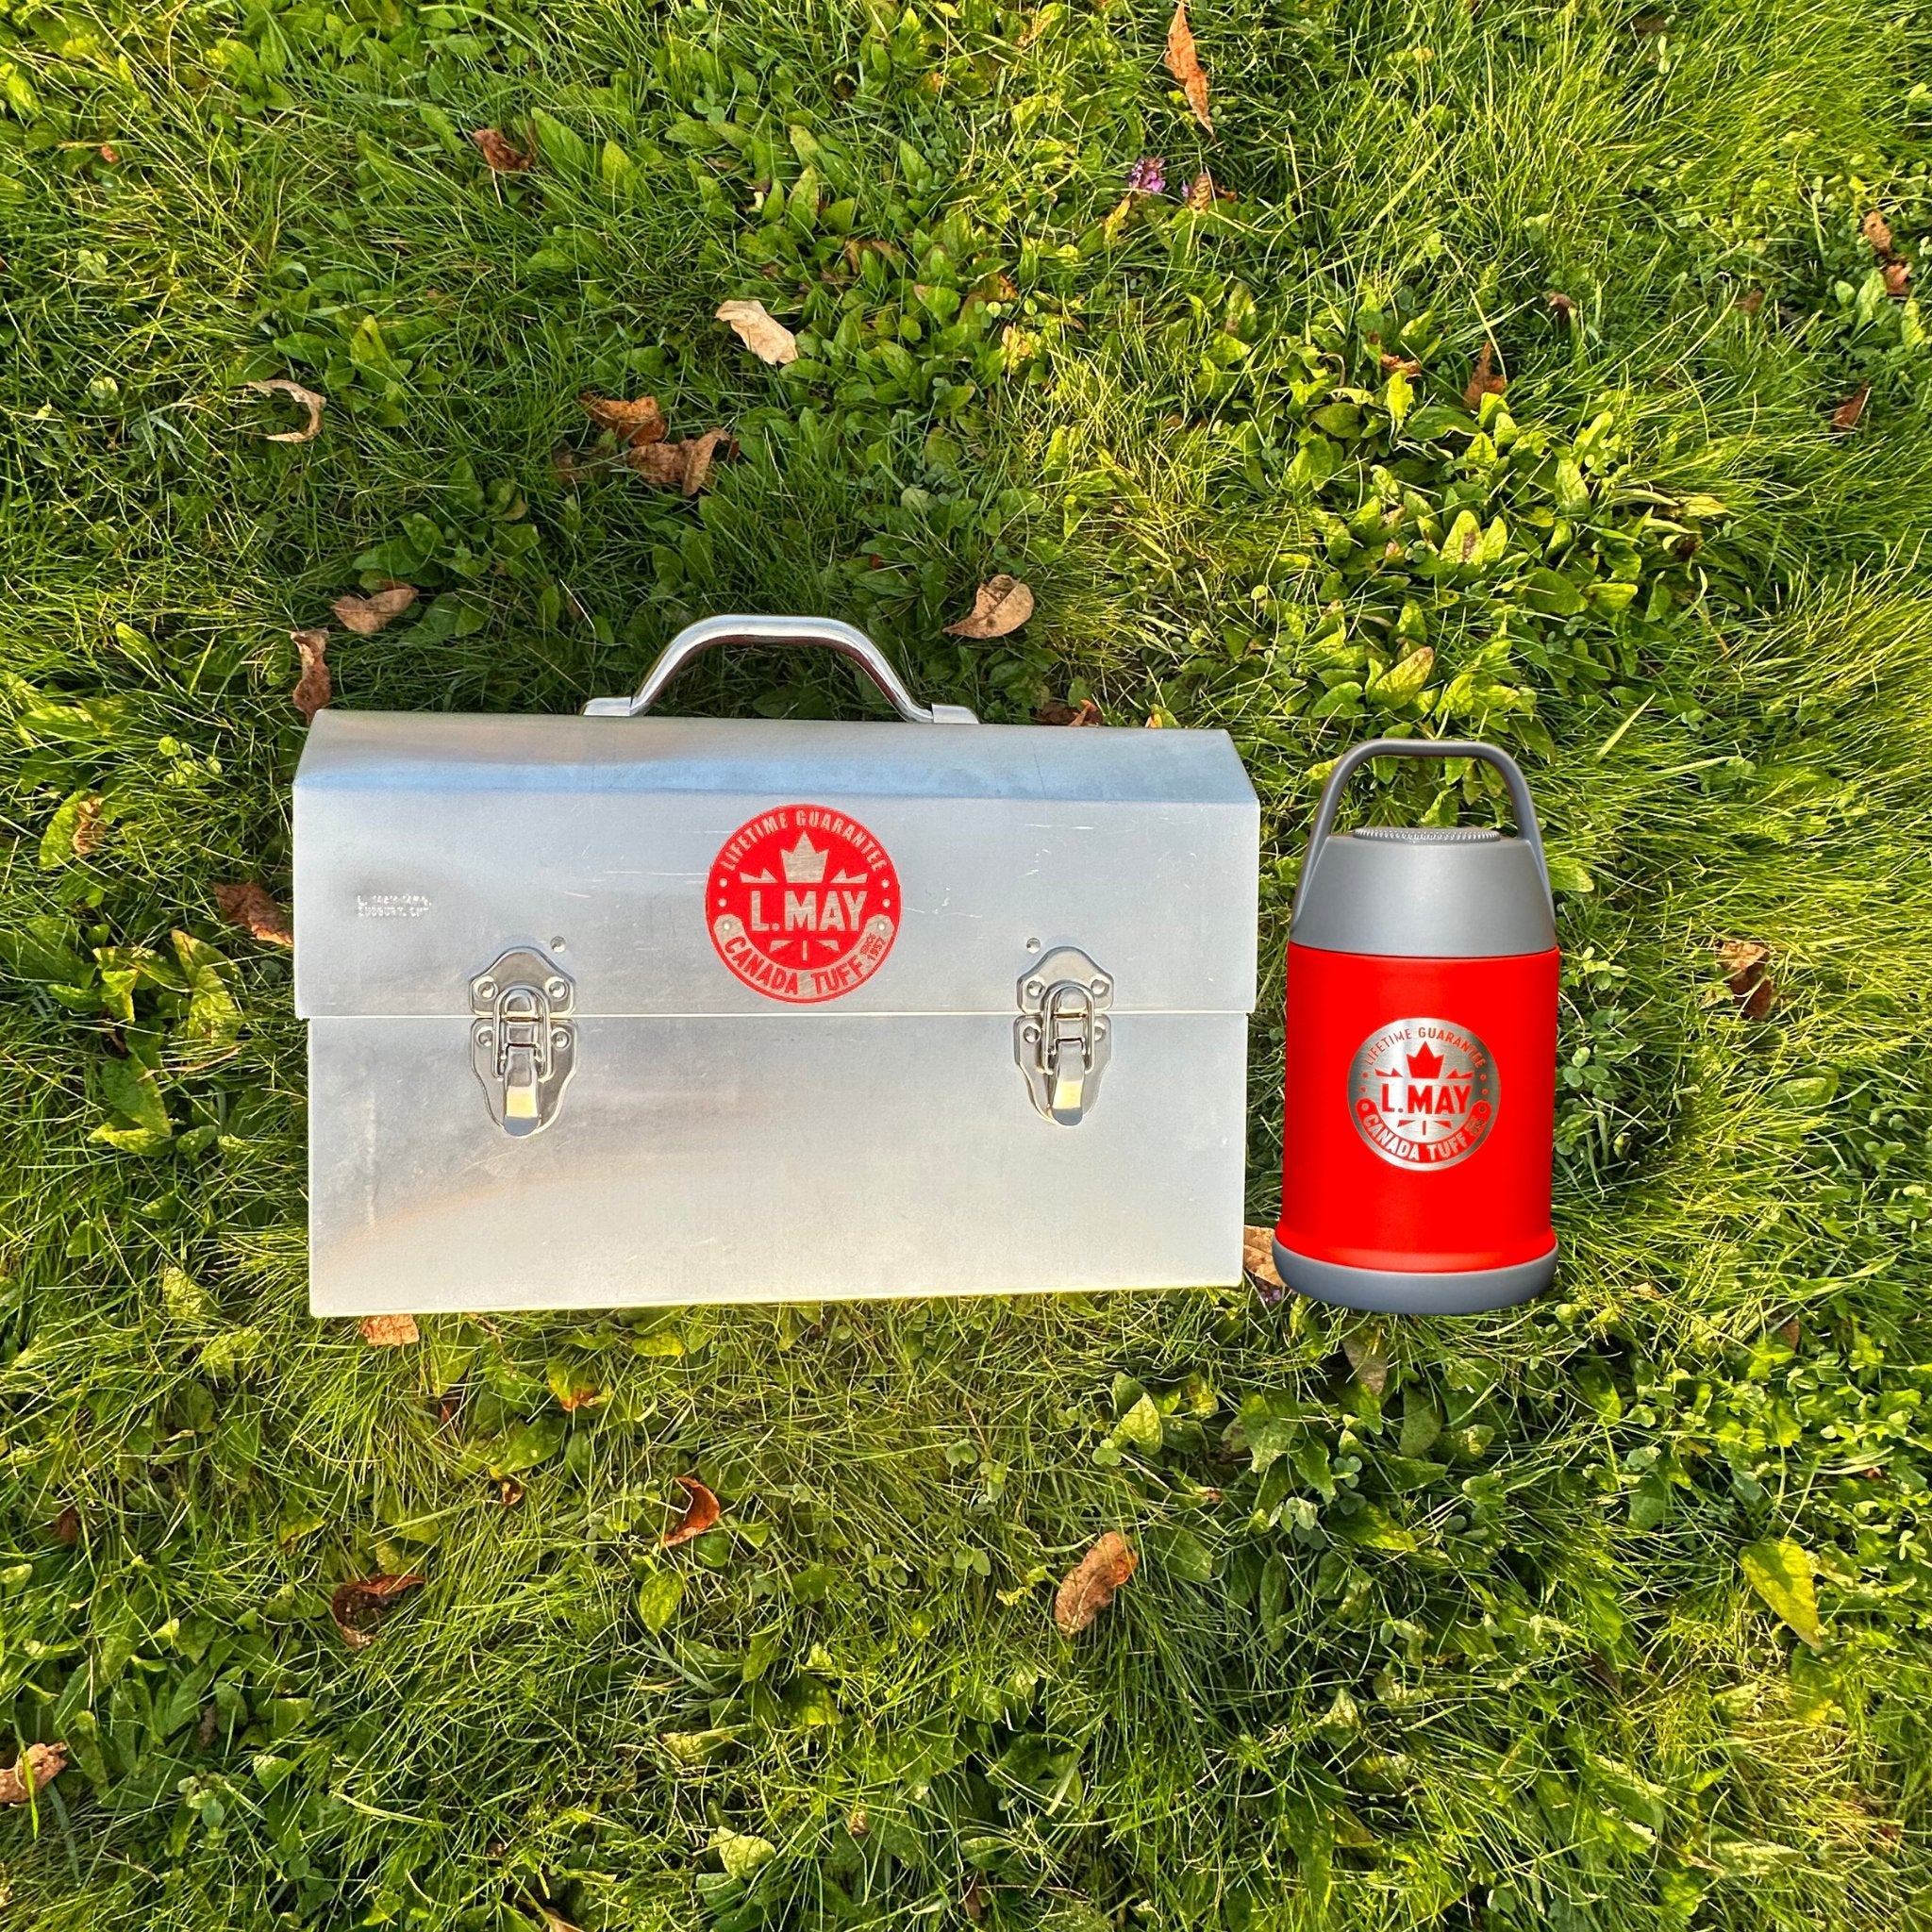 Lifestyle image of an individual carrying the L. May lunchbox and Chilly Moose drinkware, embodying the spirit of adventure and outdoor enjoyment